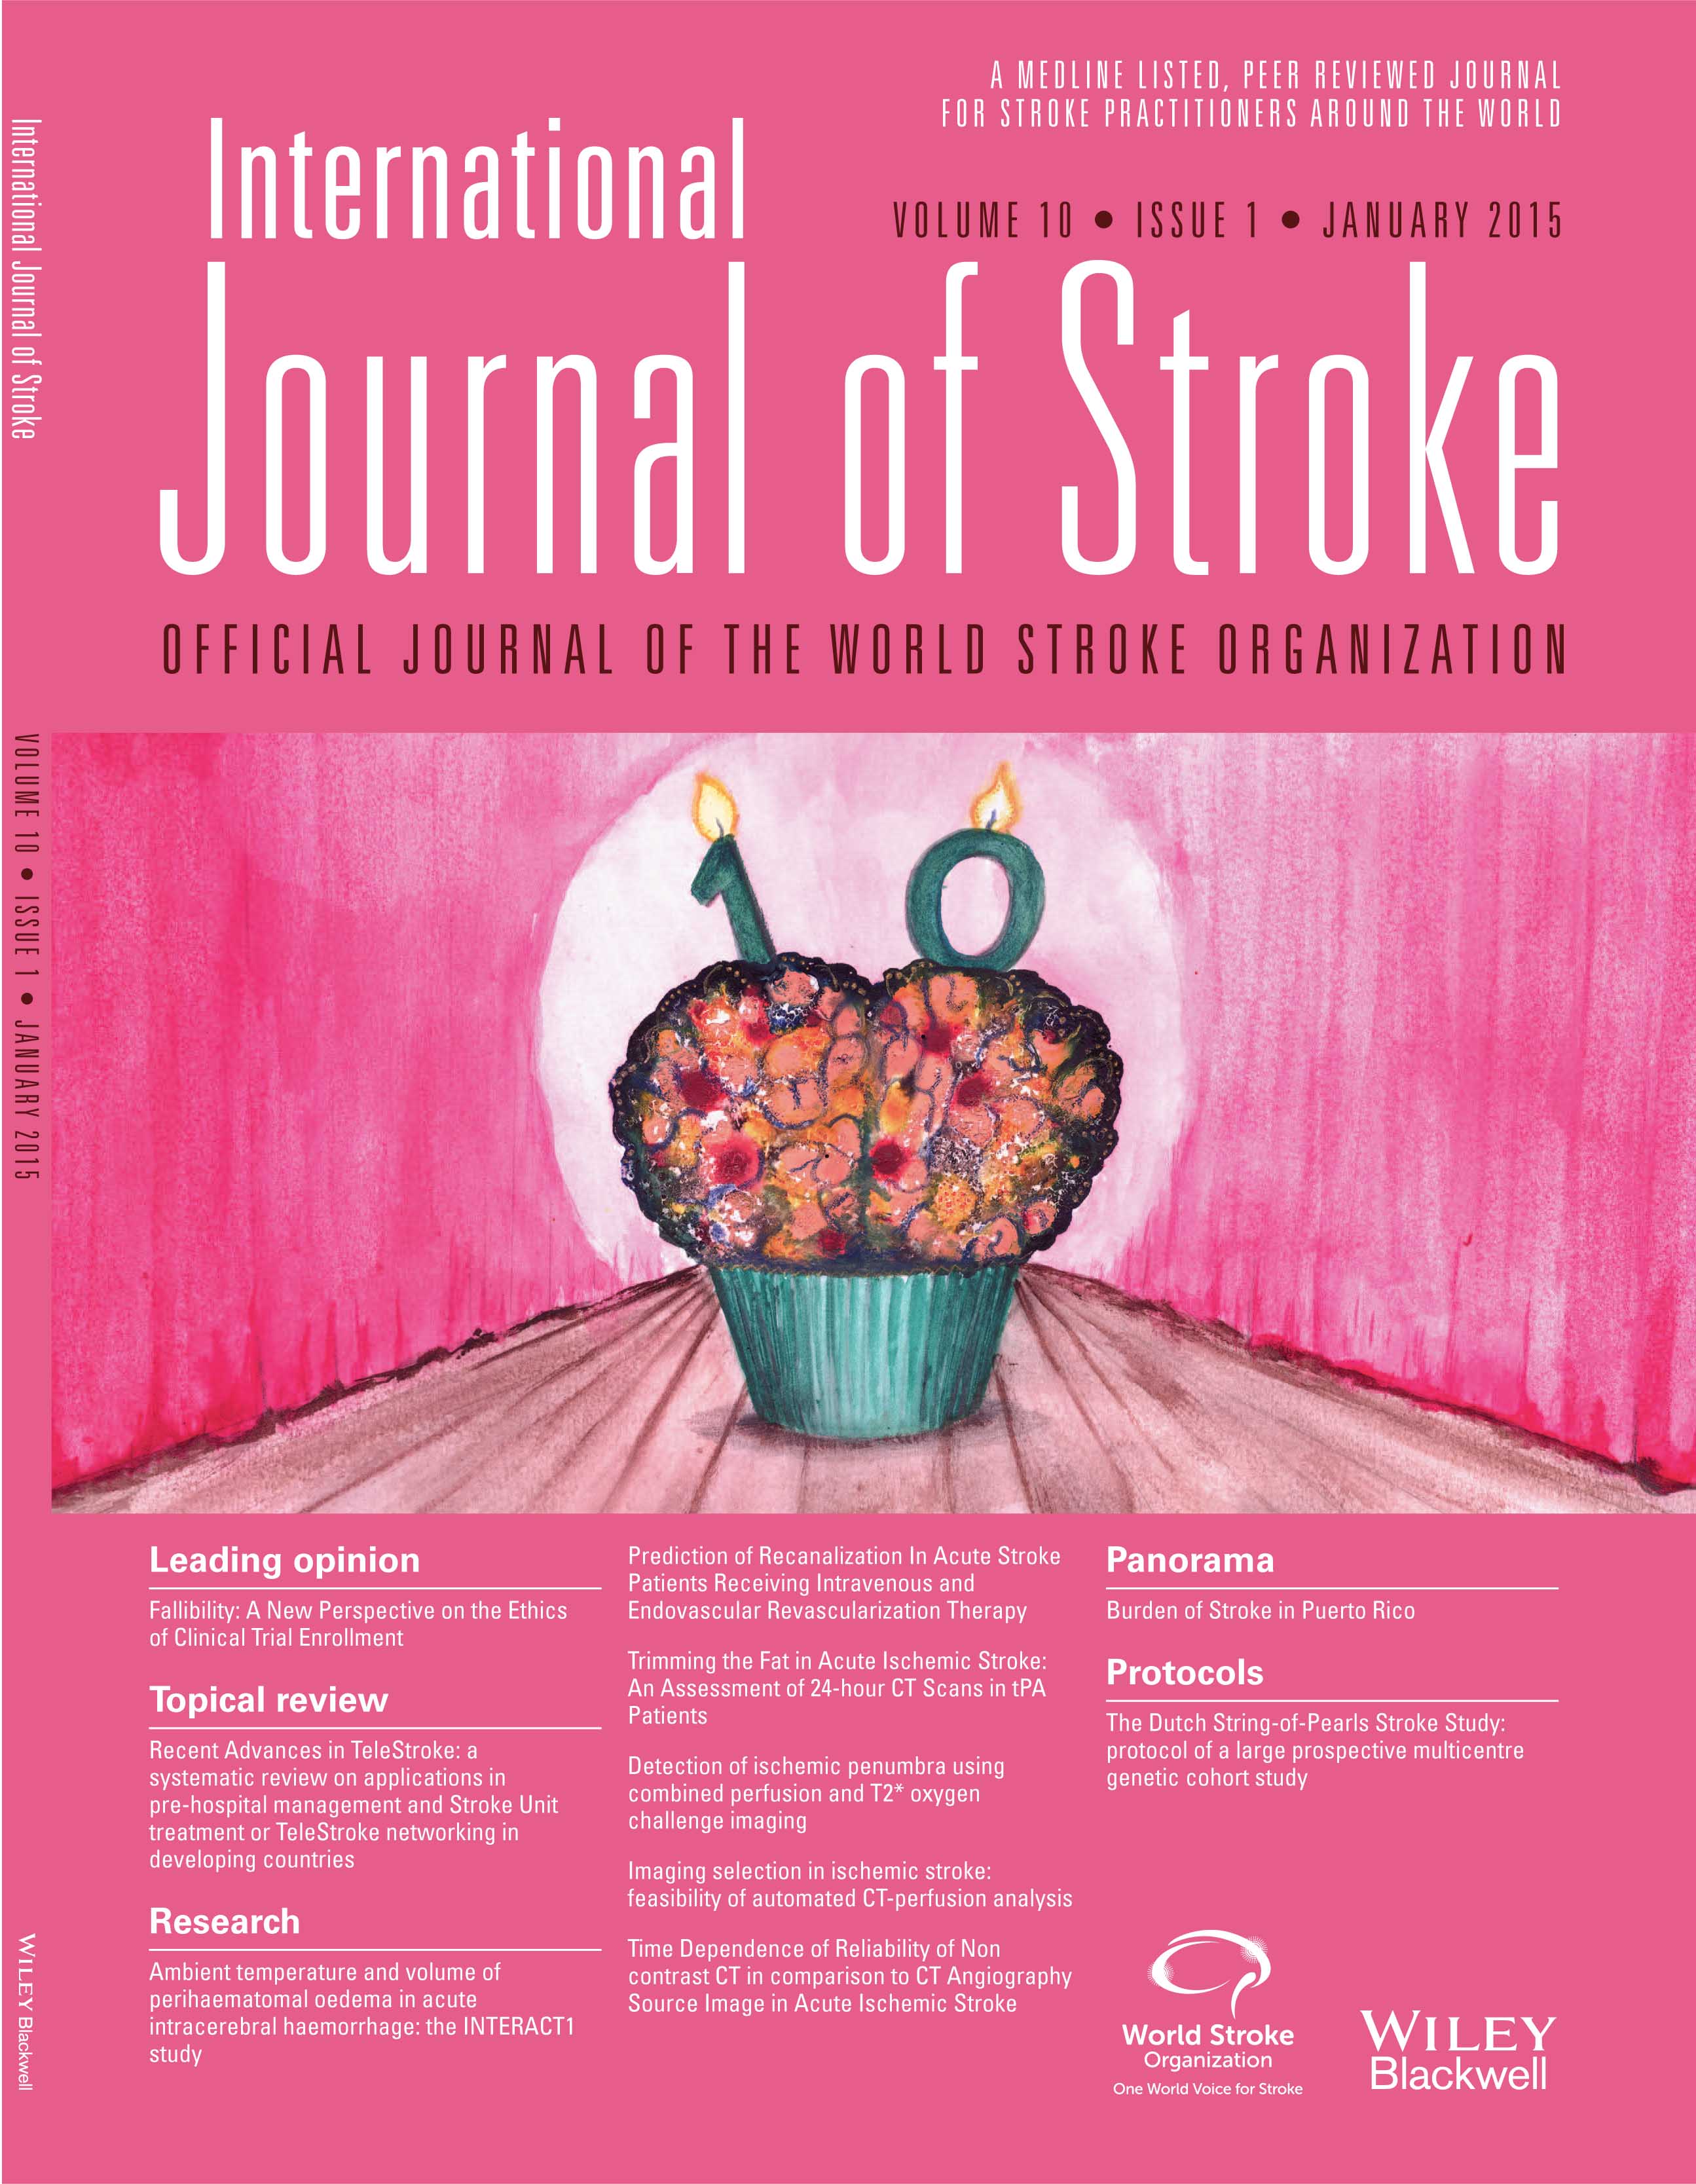 Should minor stroke patients be thrombolysed? A focused review and future directions